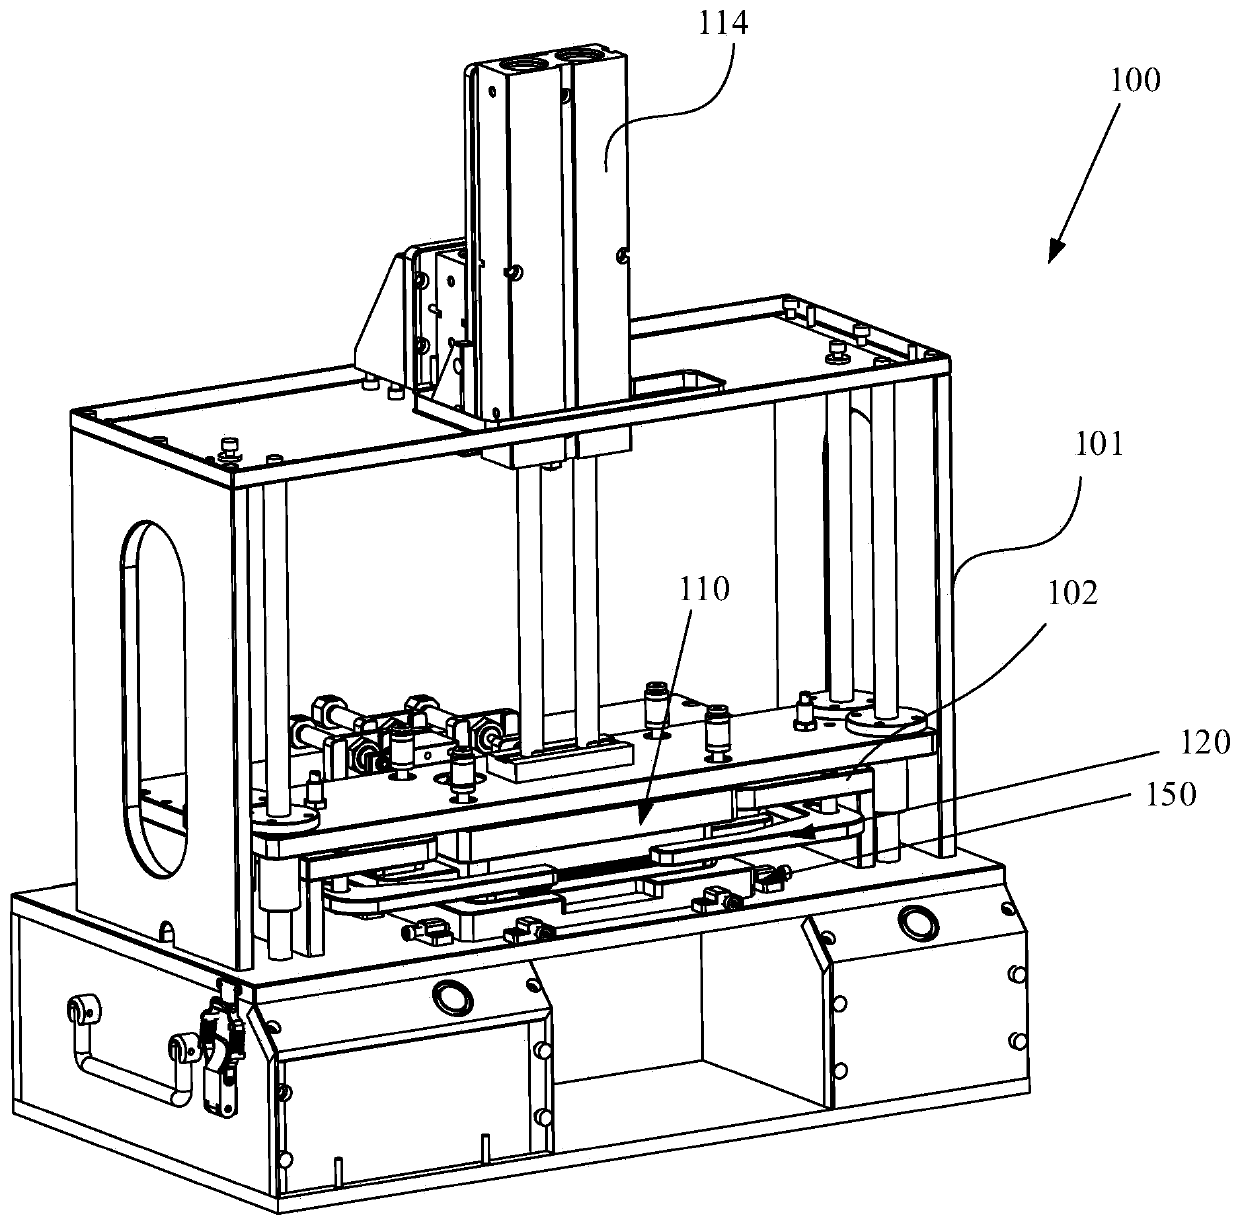 Apparatus for screen assembly